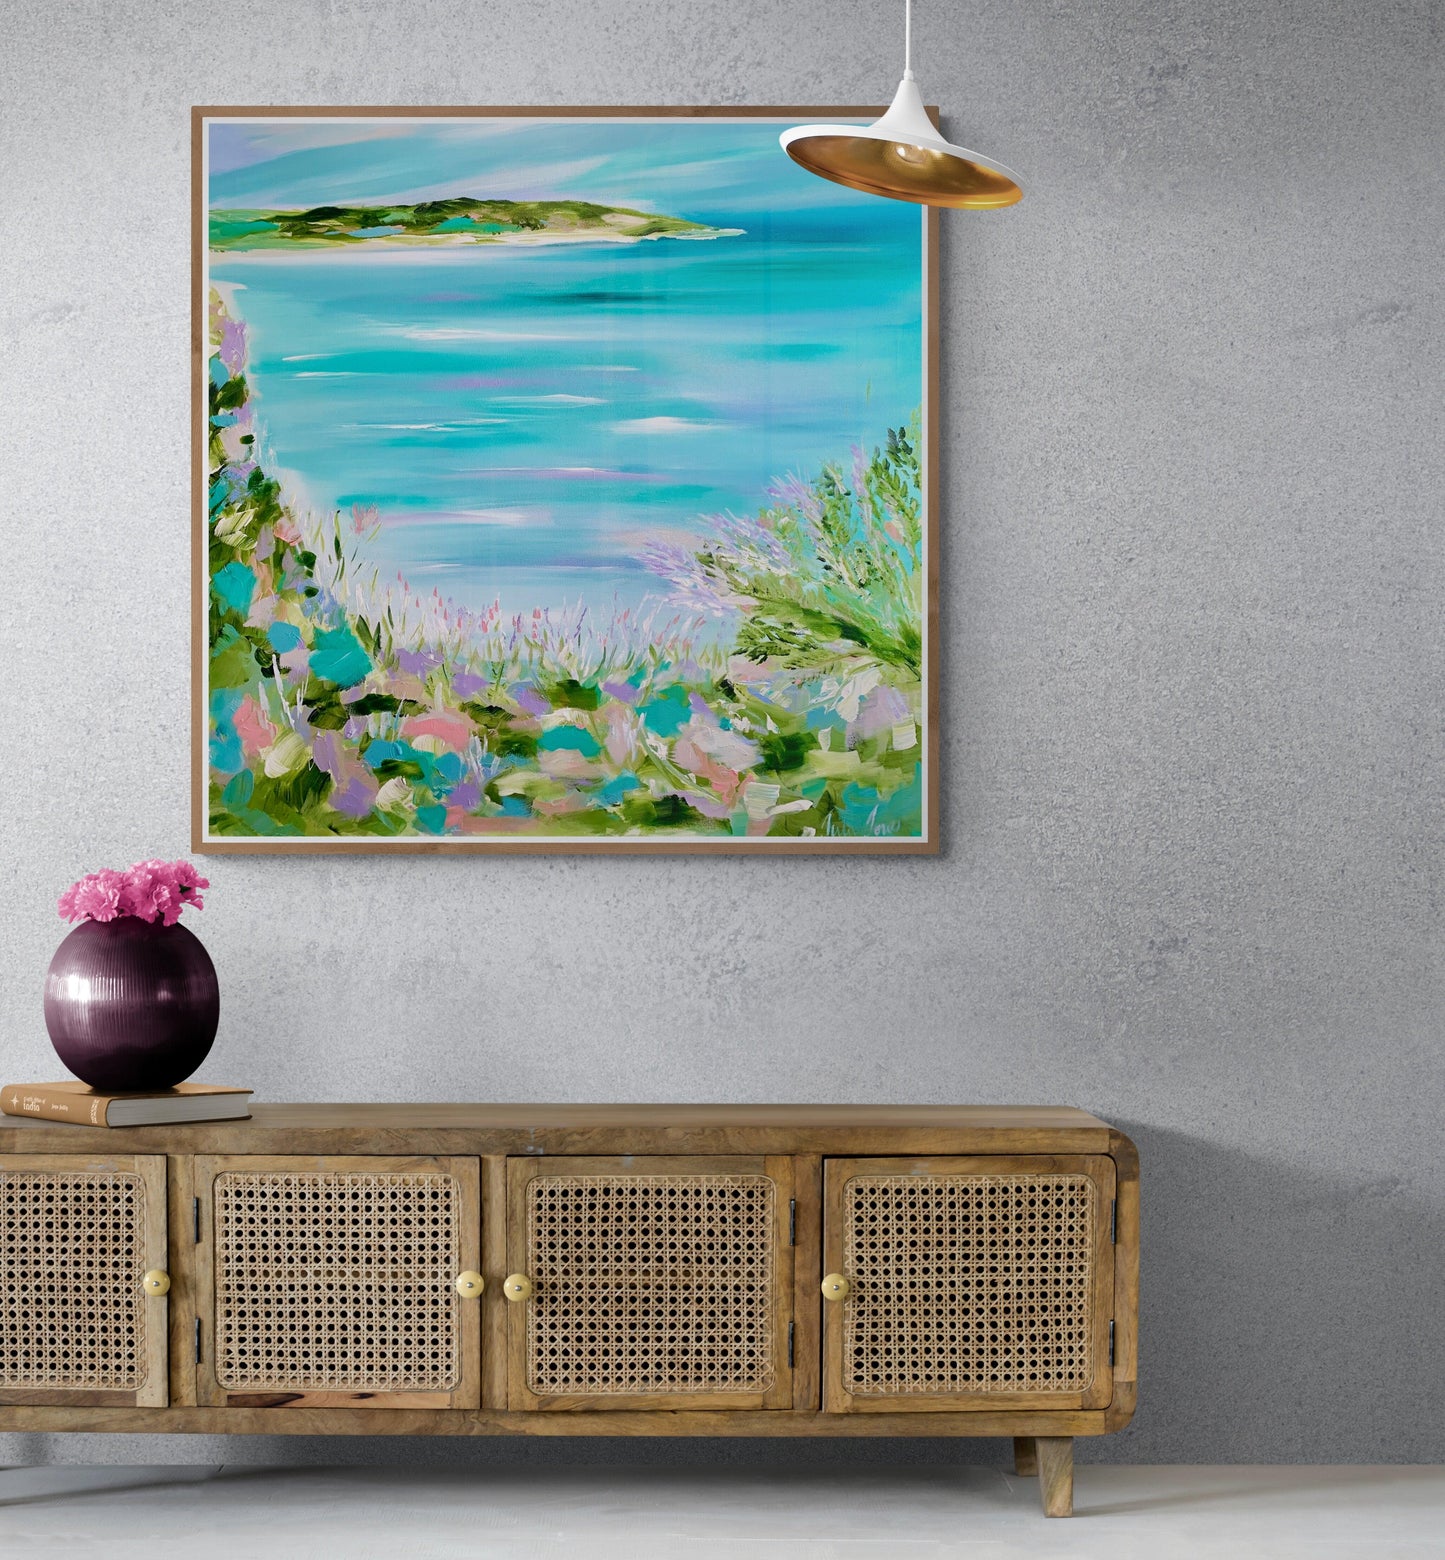 Views over the bay - 1m x 1m - Original Artwork -Available by Commission